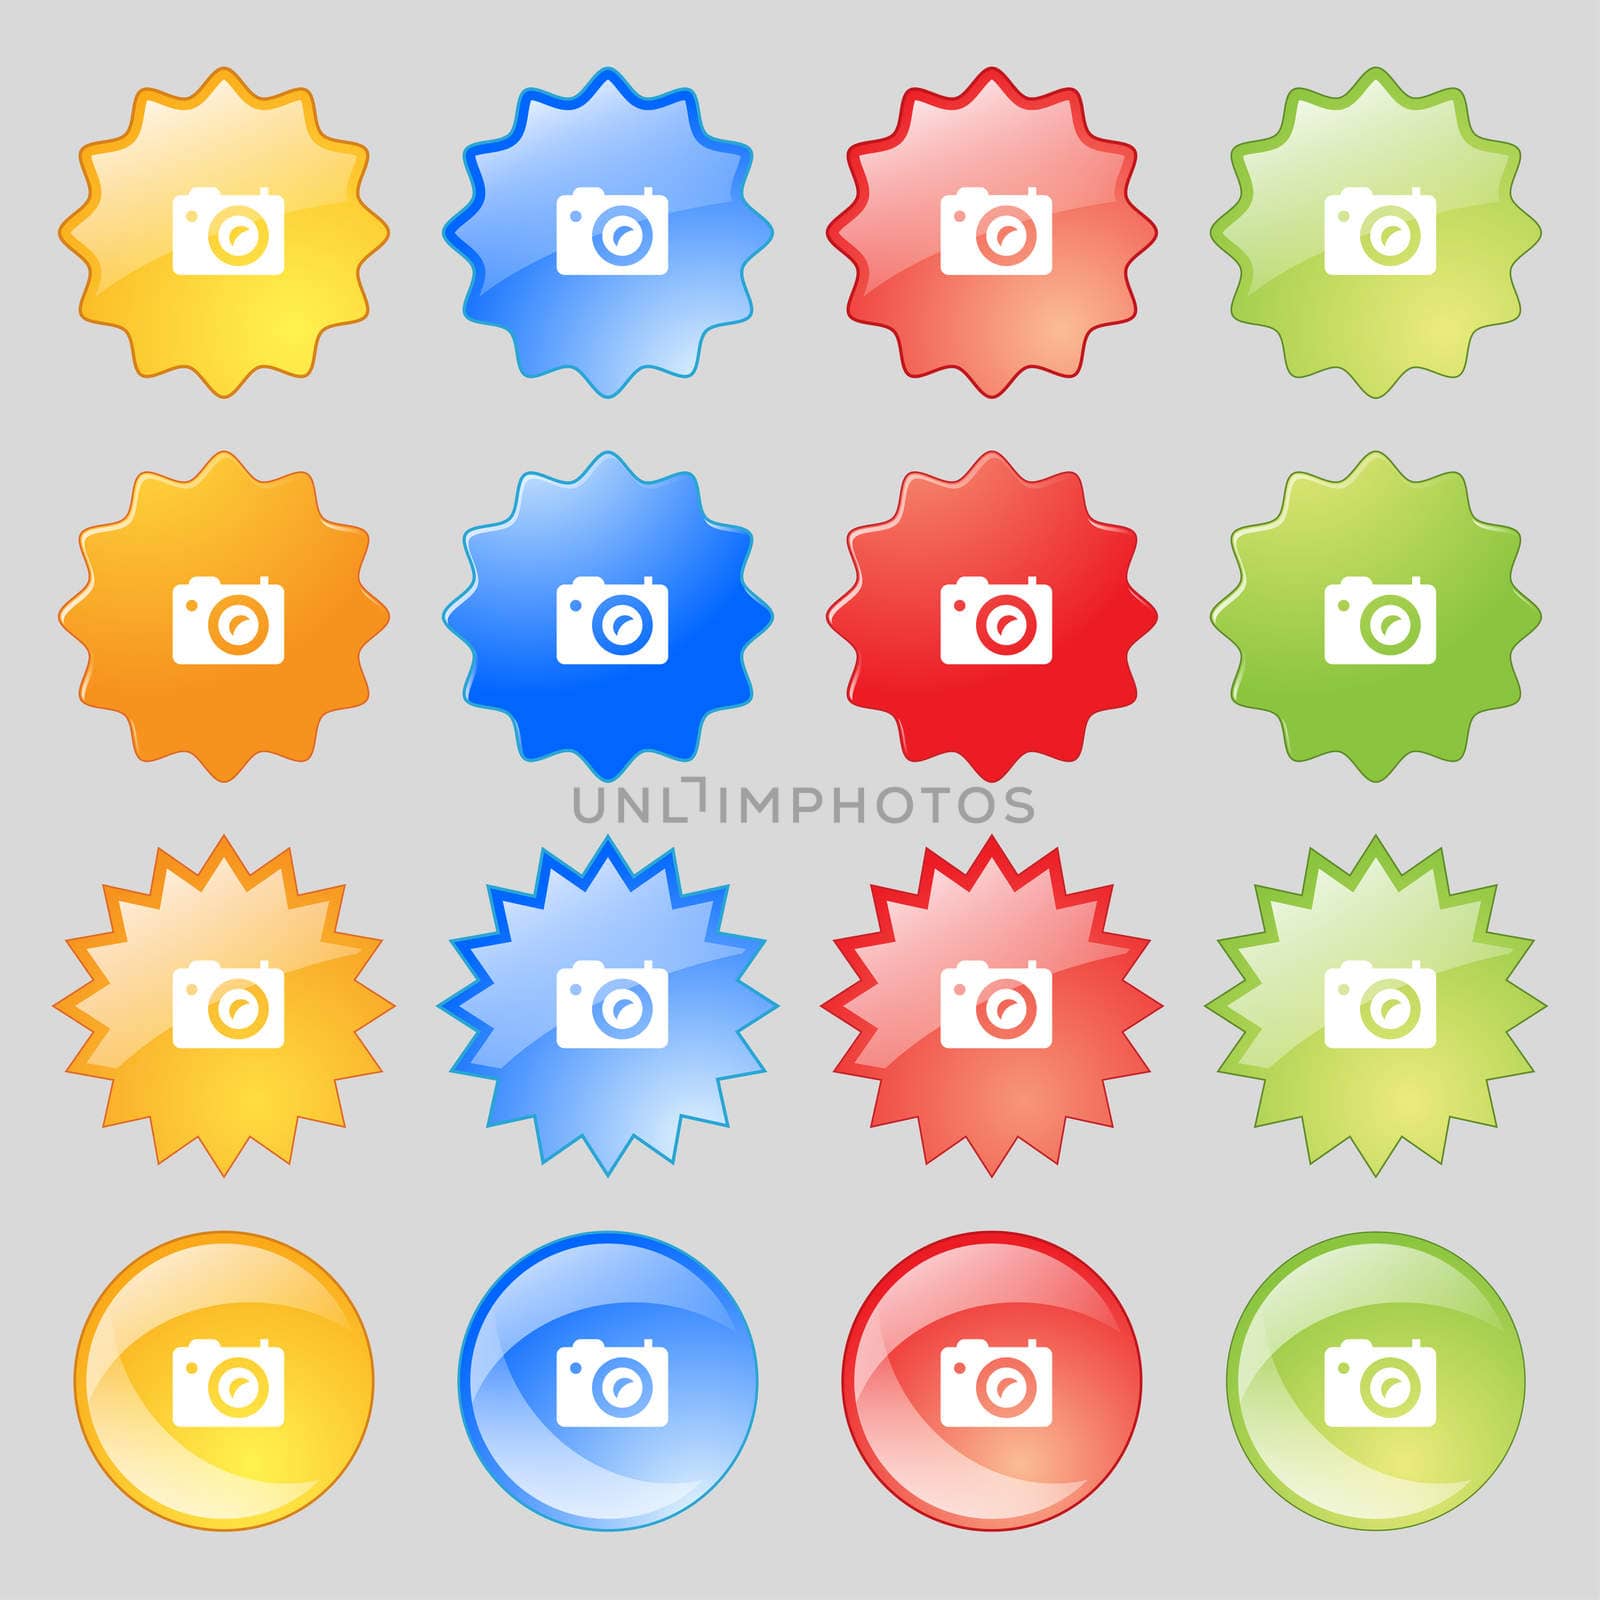 Digital photo camera icon sign. Big set of 16 colorful modern buttons for your design. illustration